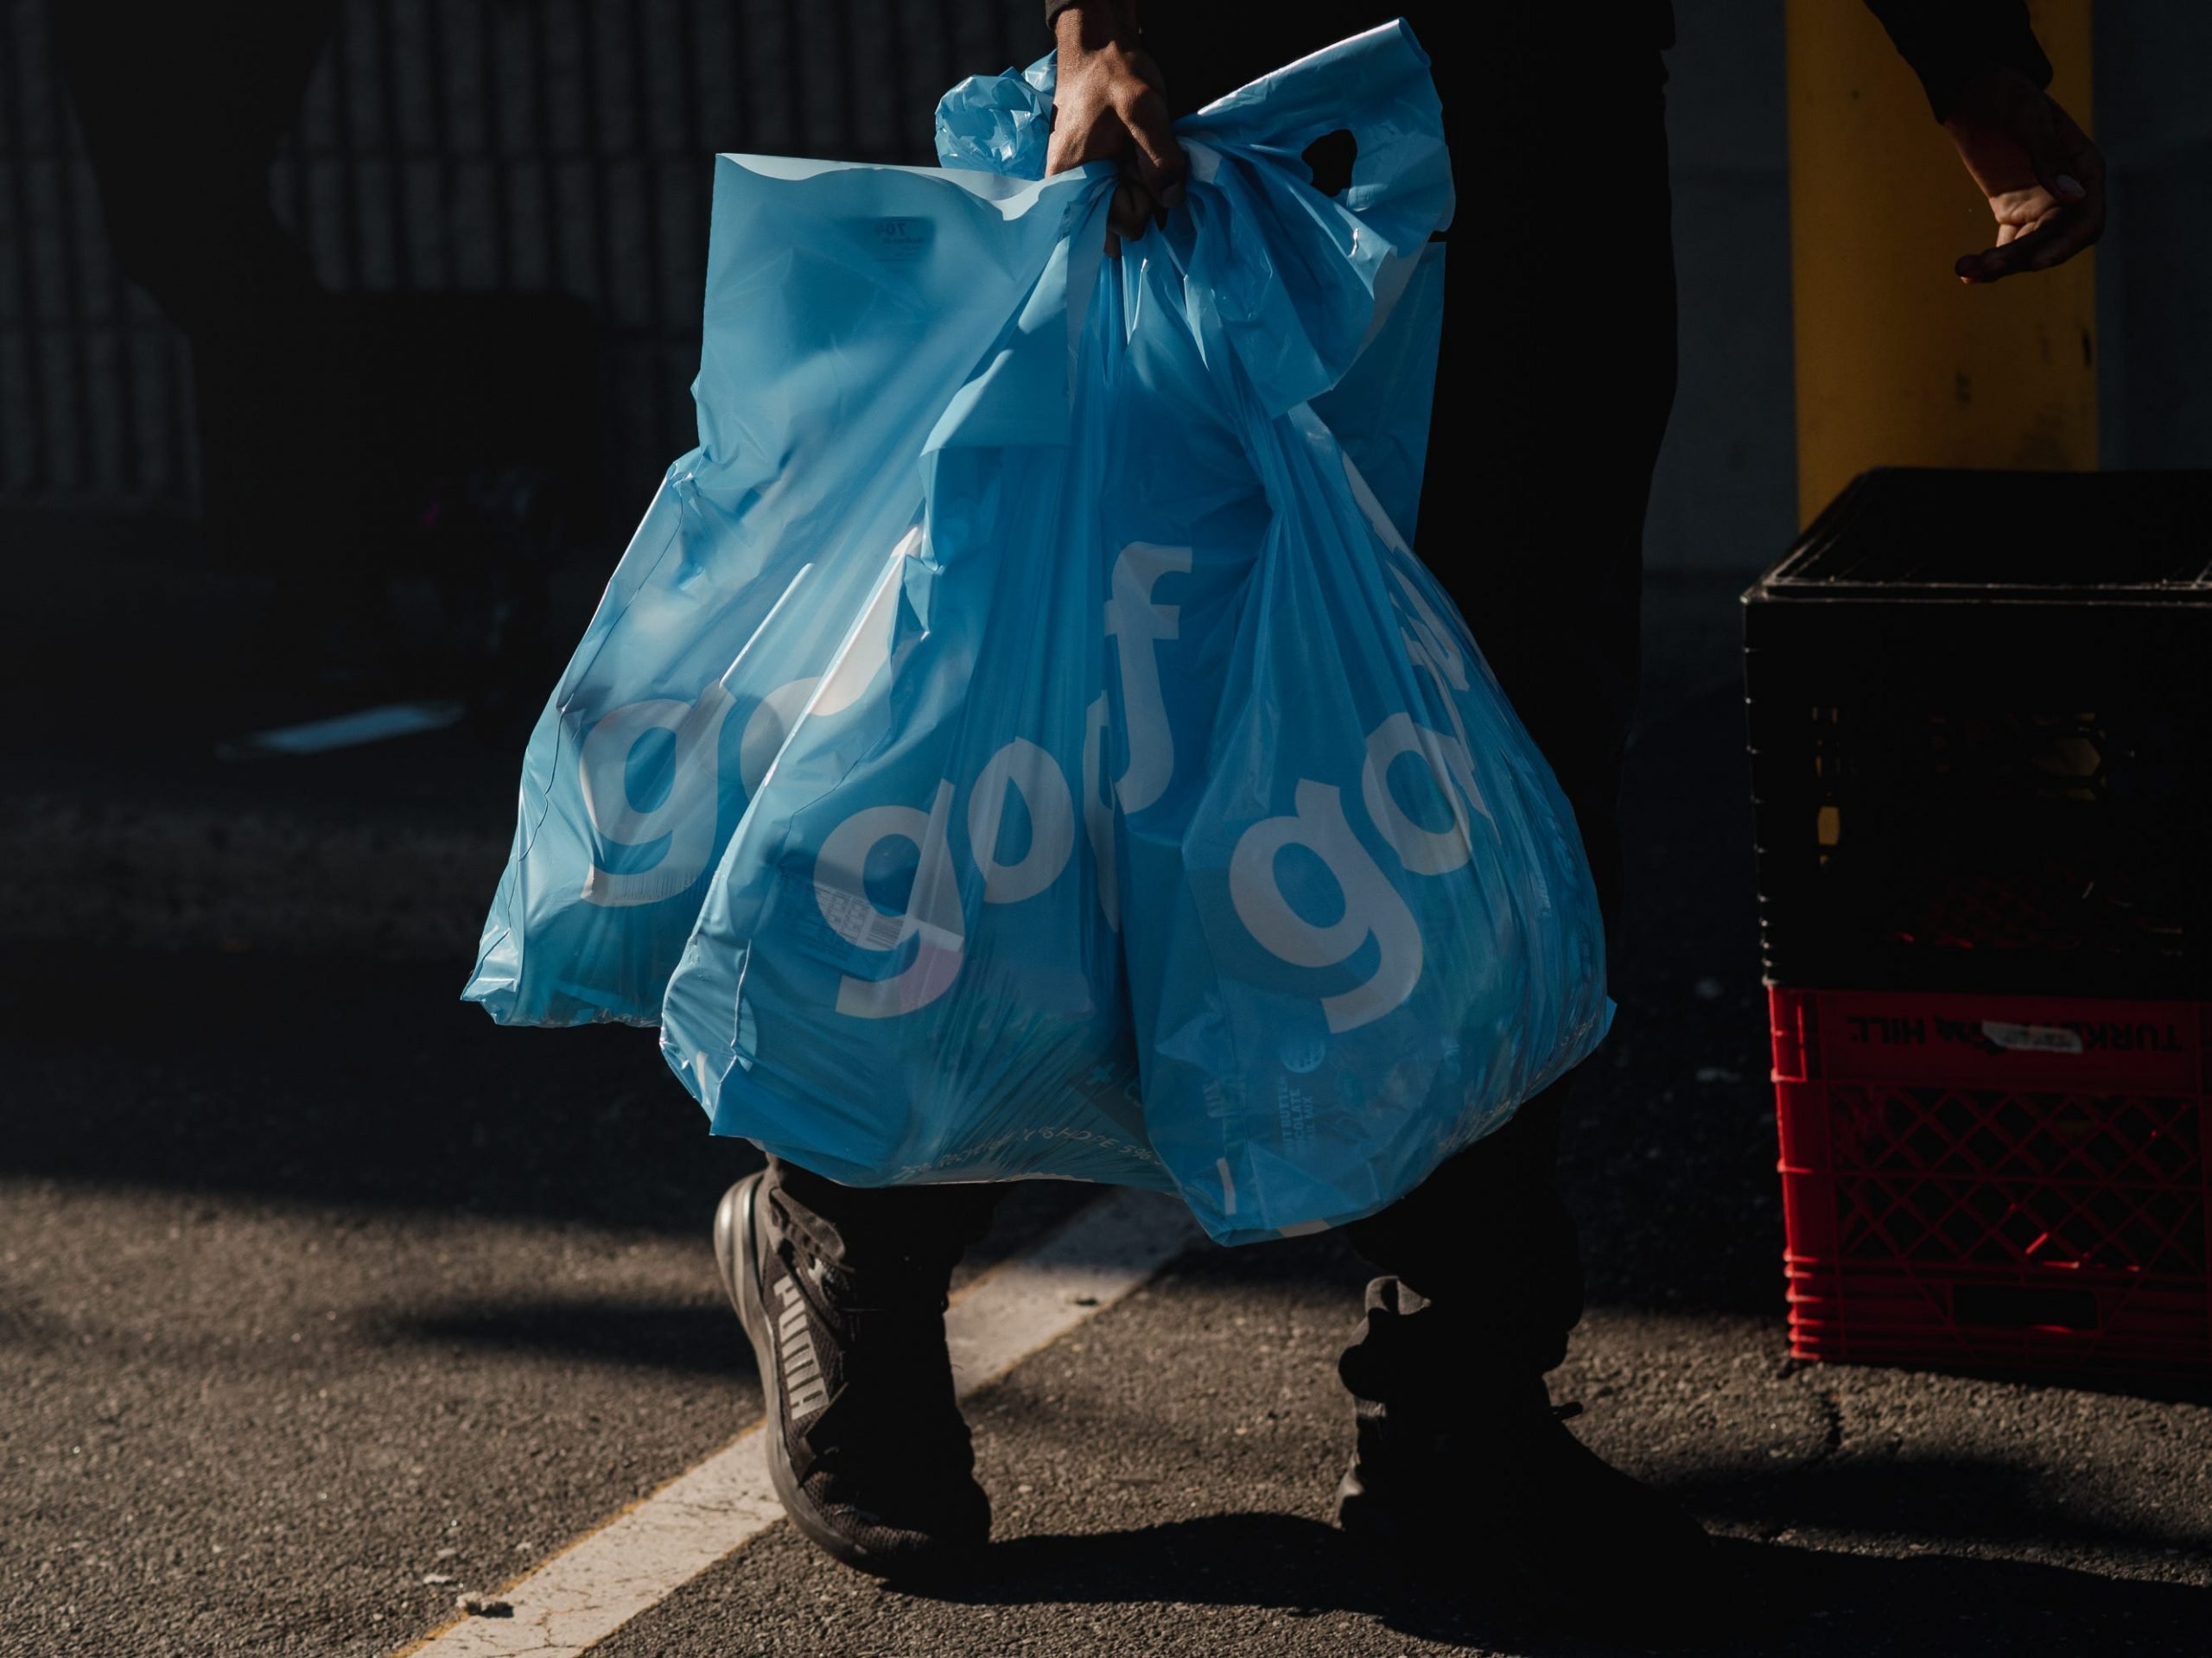 Gopuff bags are carried near one of the company's warehouses.